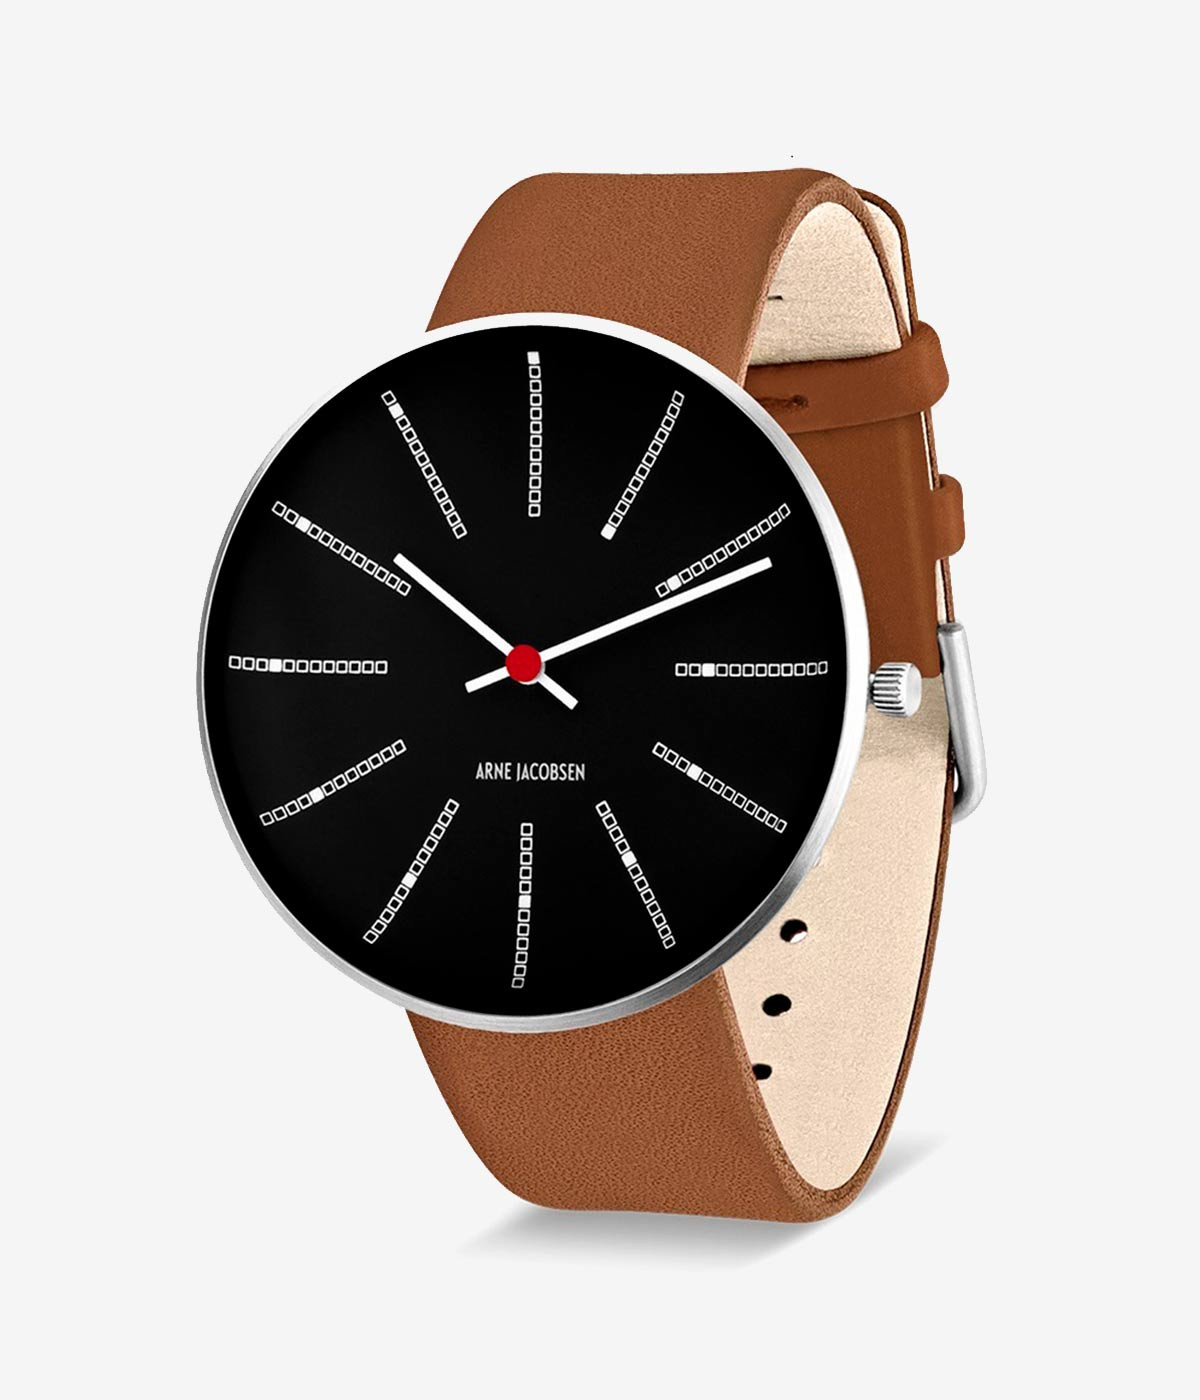 BANKERS / BROWN LEATHER STRAP 40 MM